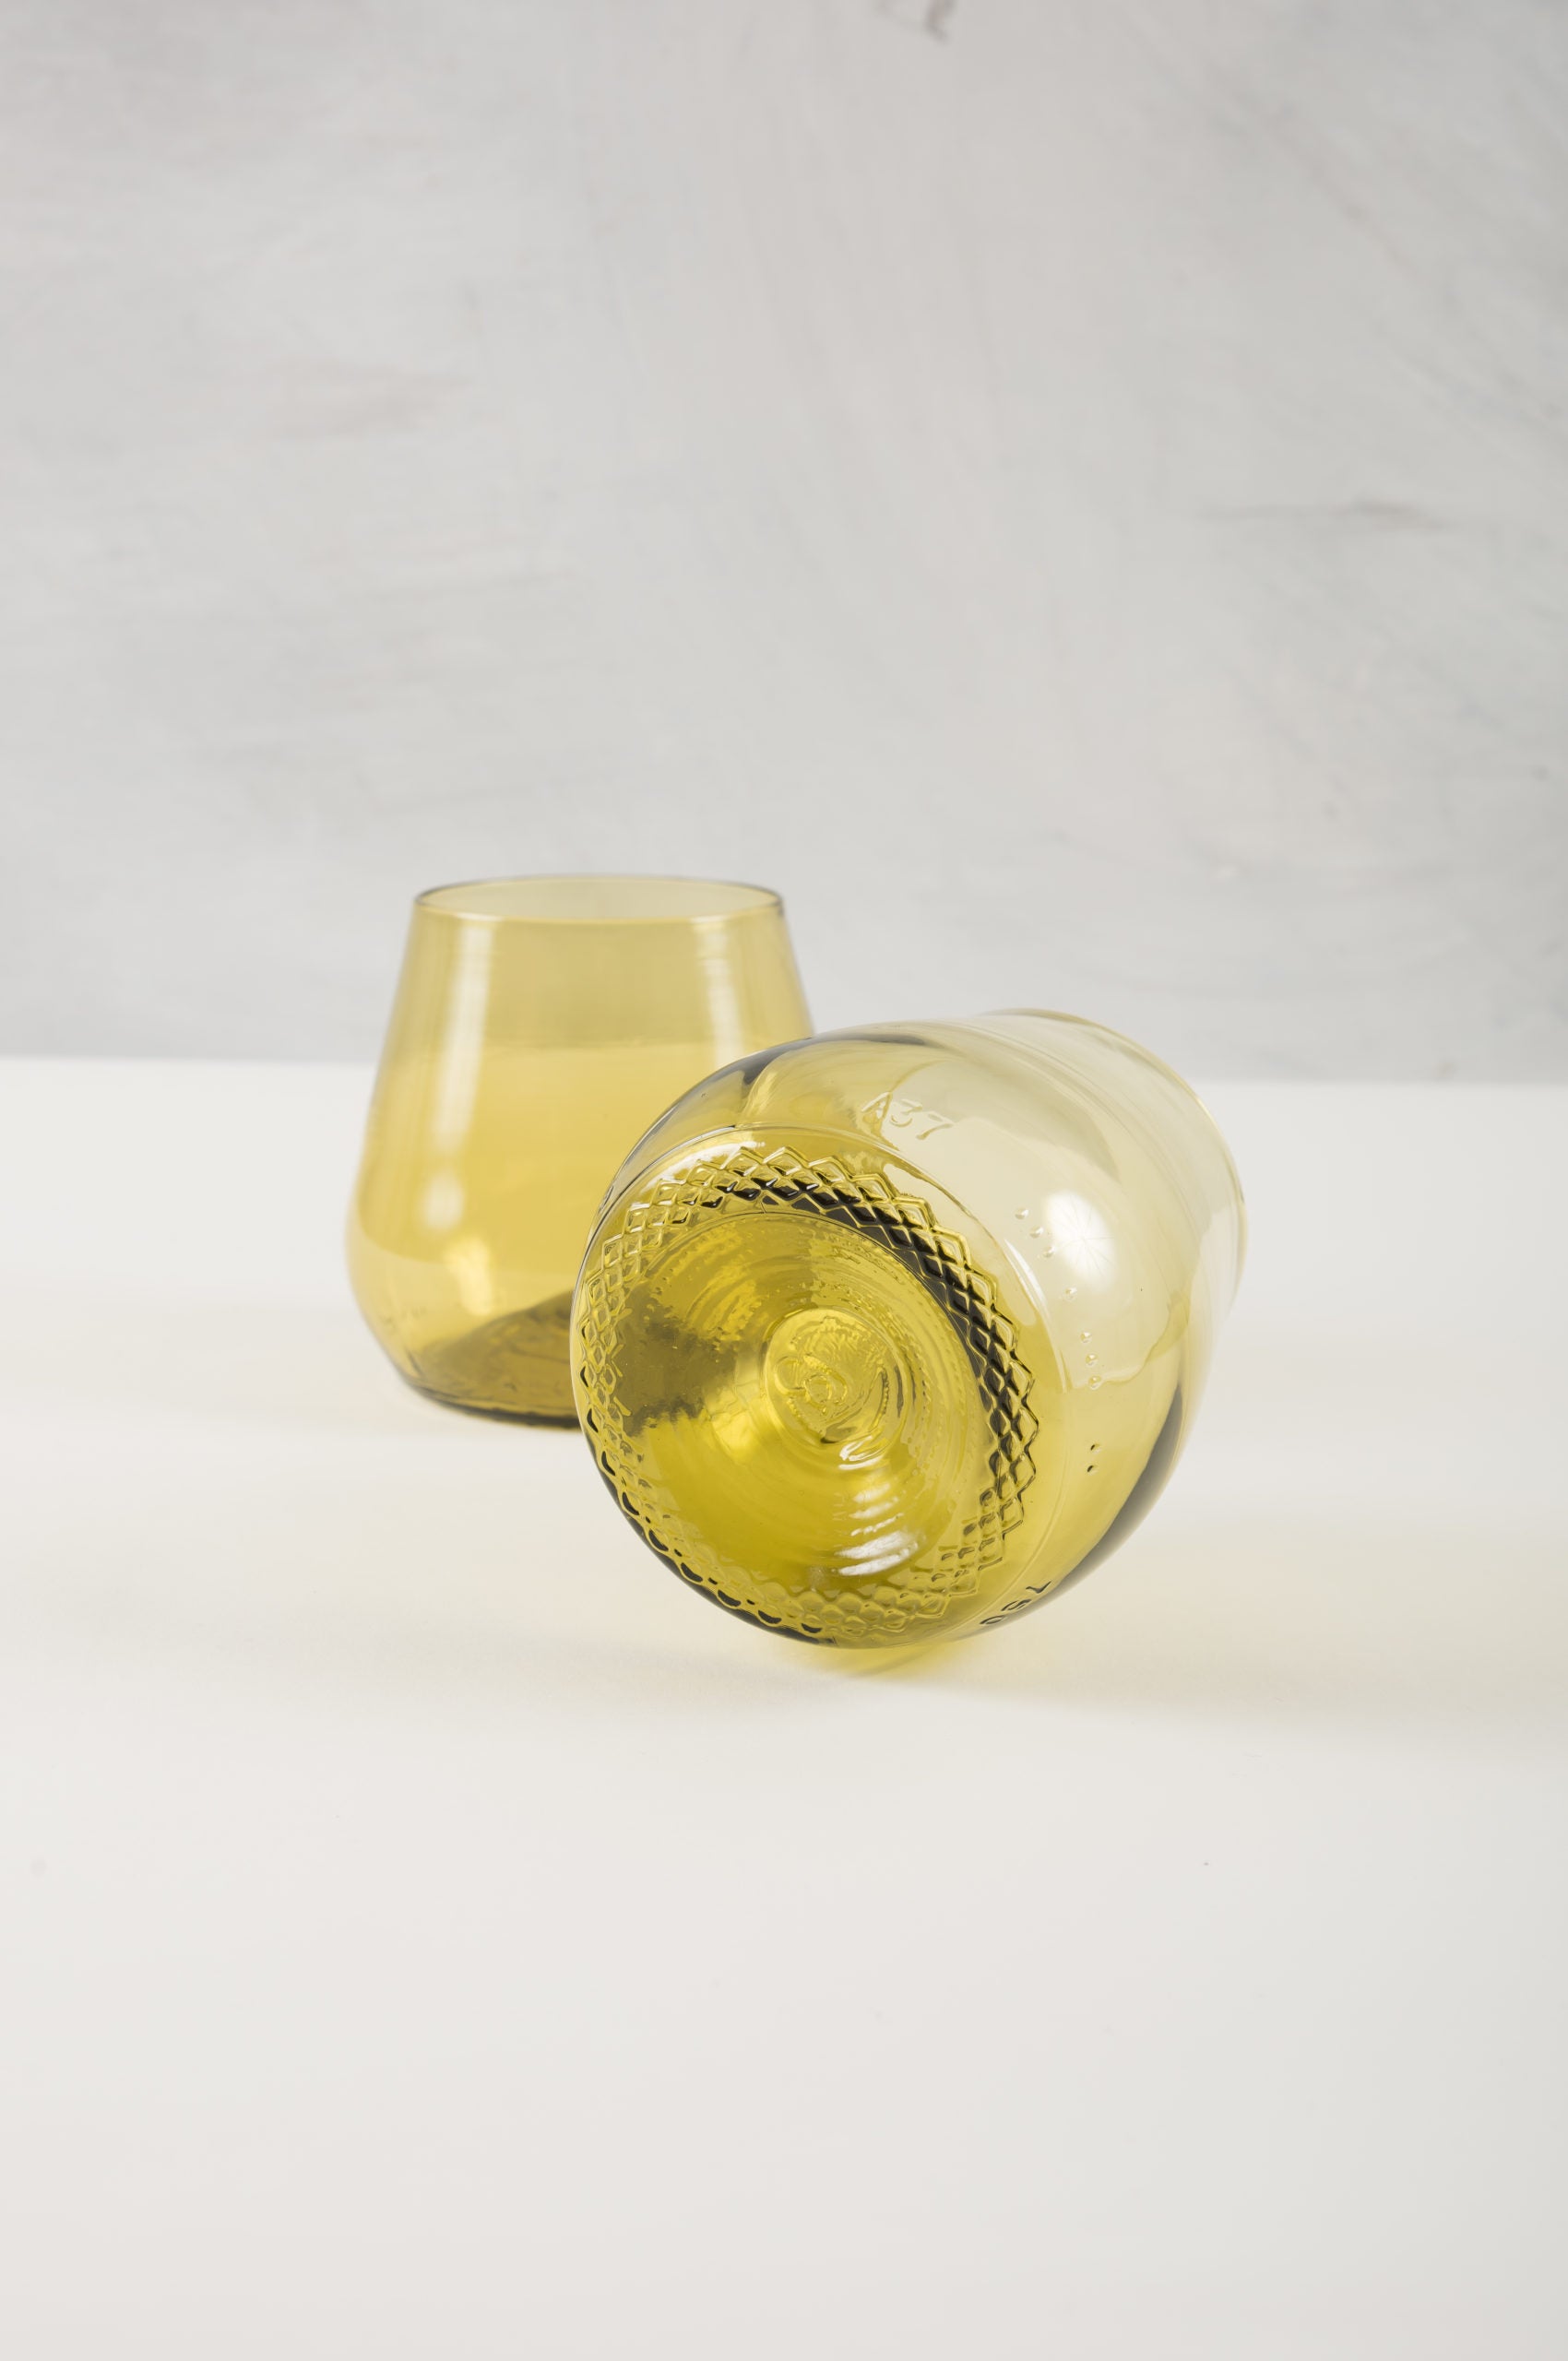 gold water or wine glasses made from recycled glass